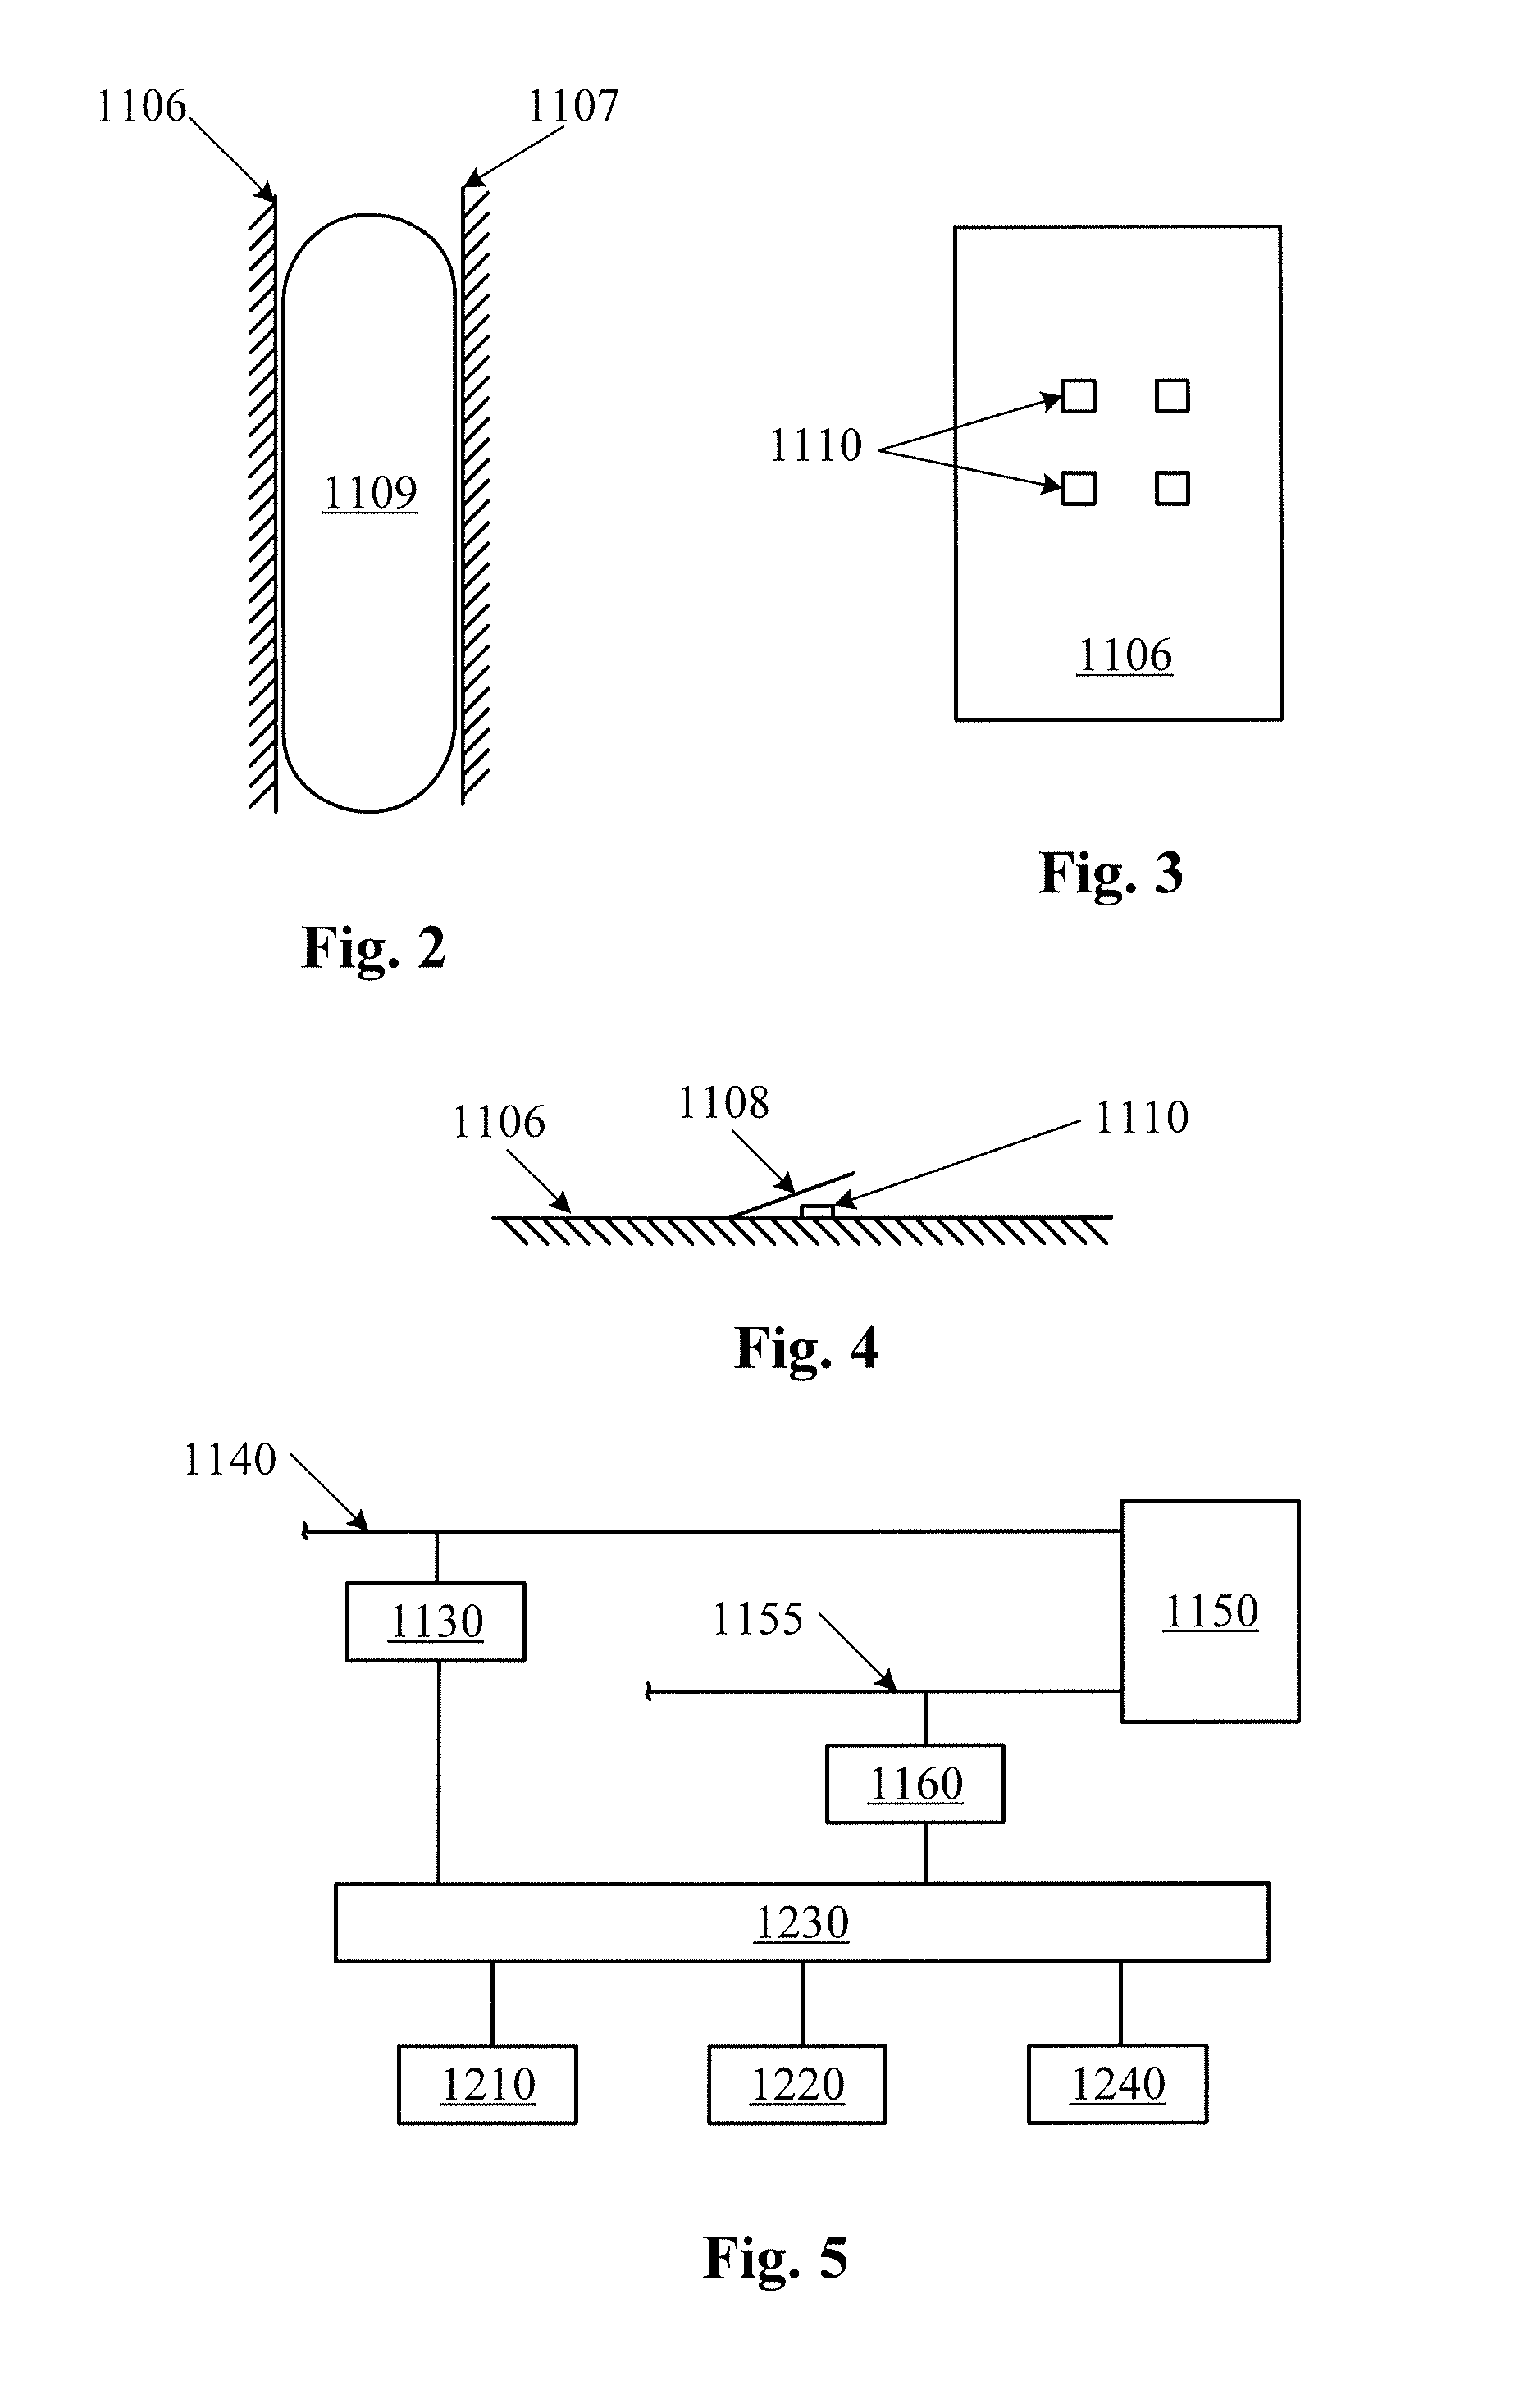 Pressure Control in Phacoemulsification System